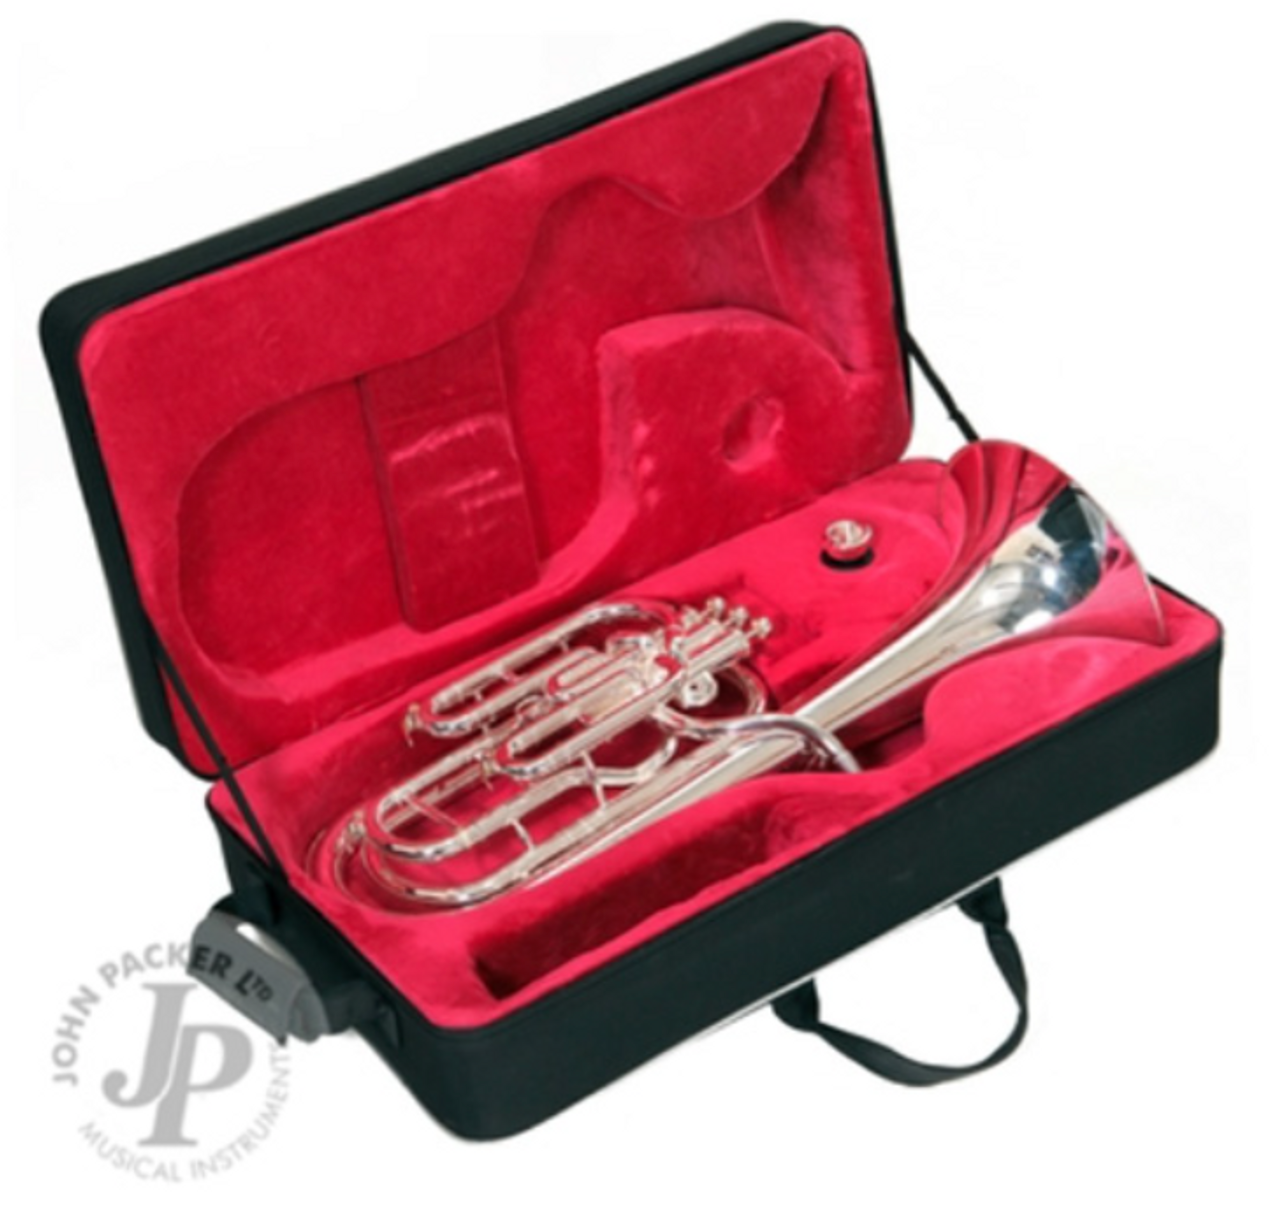 Baritone Horn Outfit B Flat Bb Key Brass Instrument With Case,Mouthpiece